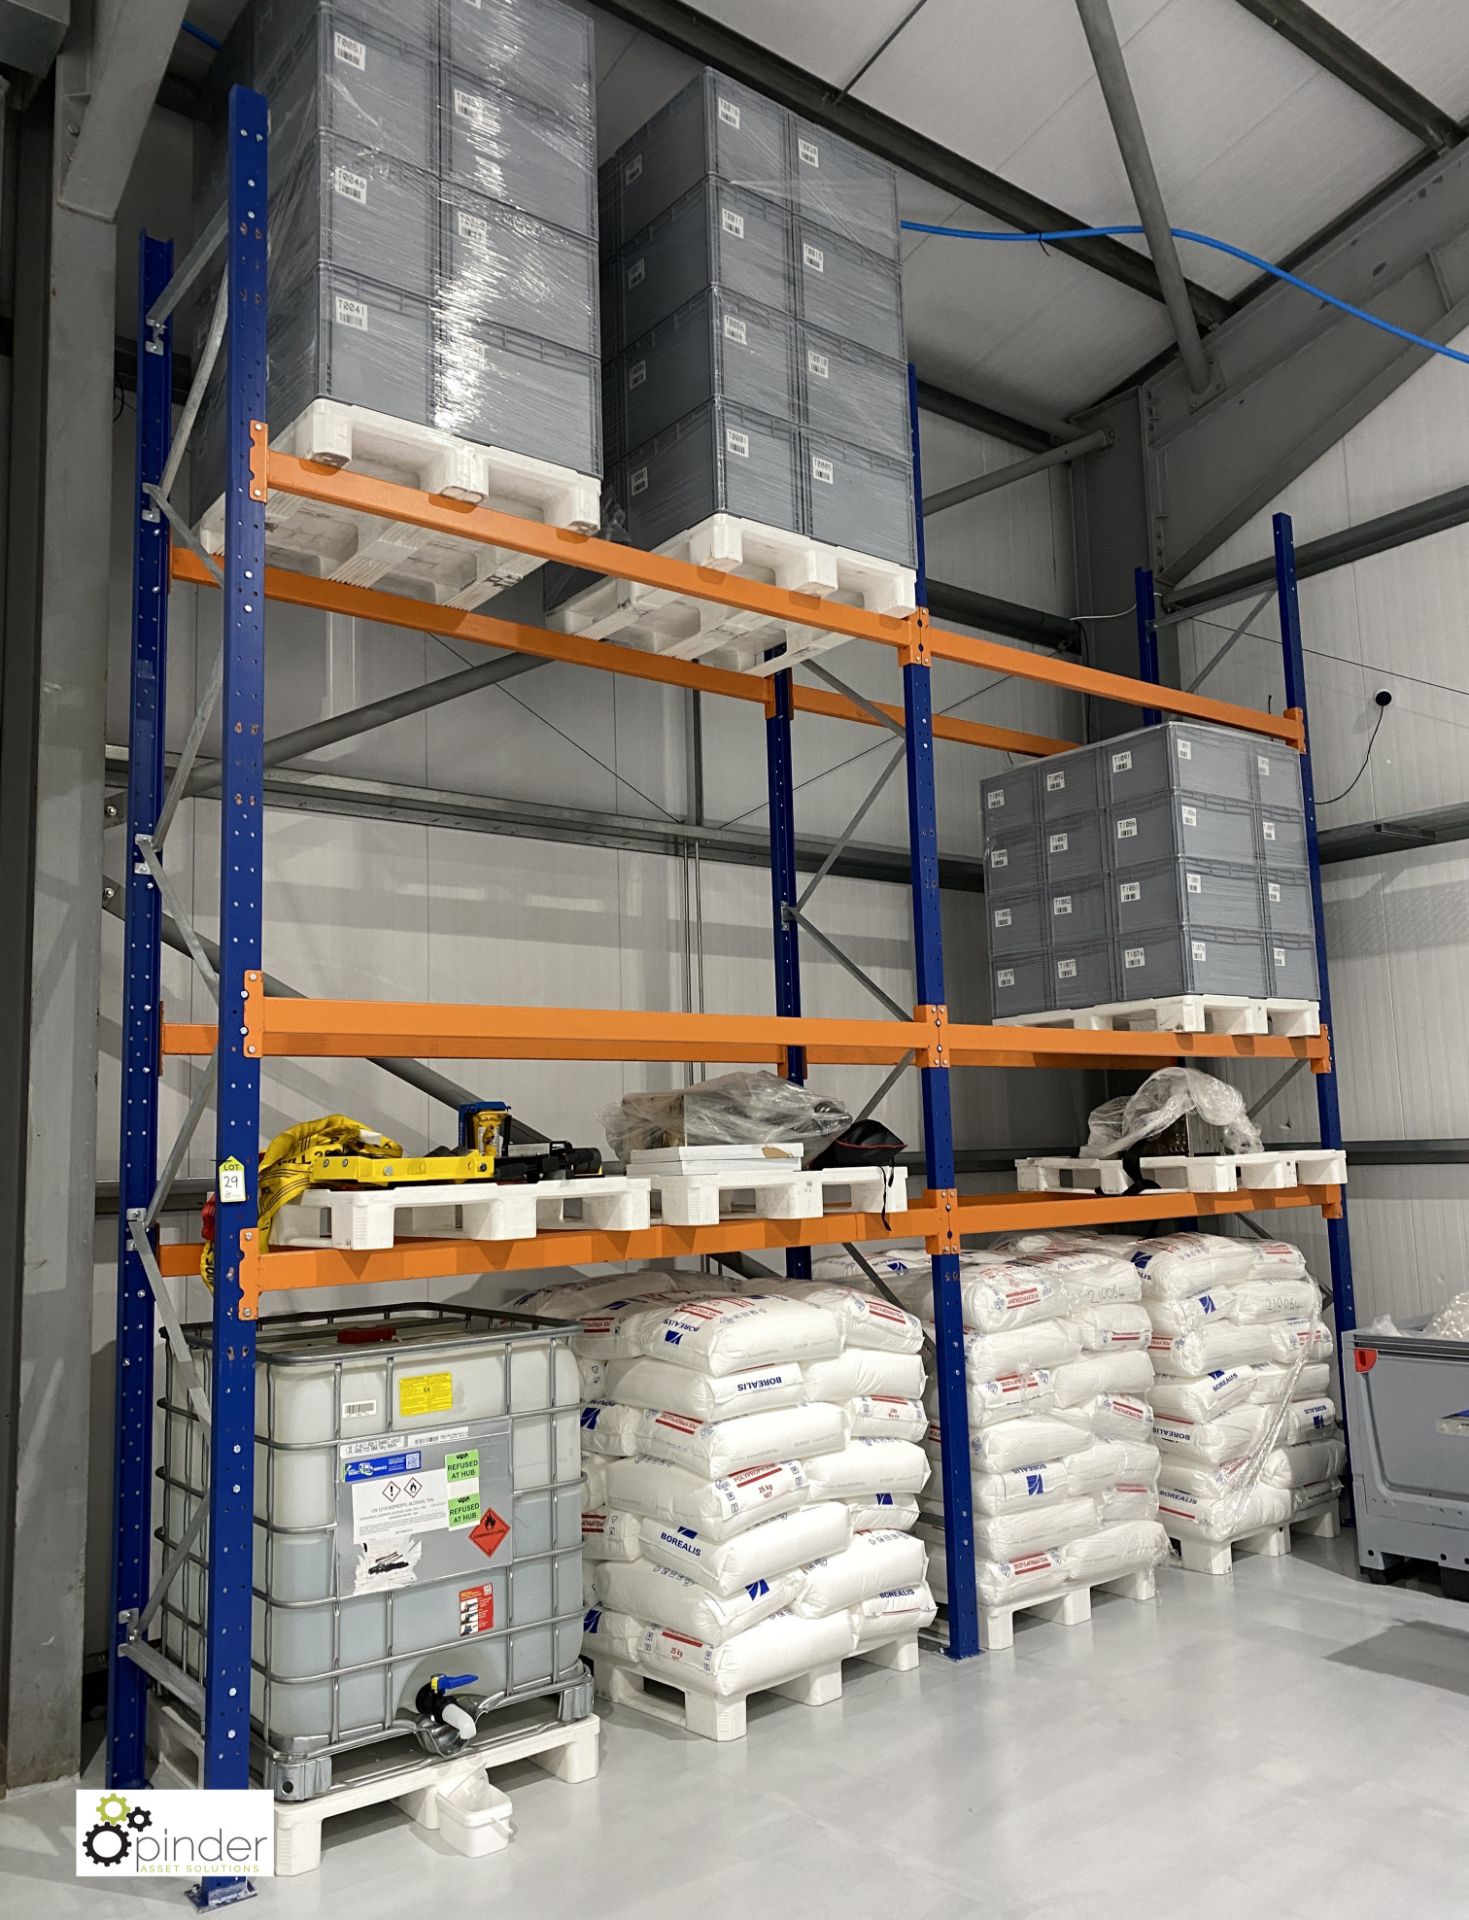 2 bays Pallet Racking comprising 3 uprights 4850mm x 900mm, 12 beams 2600mm